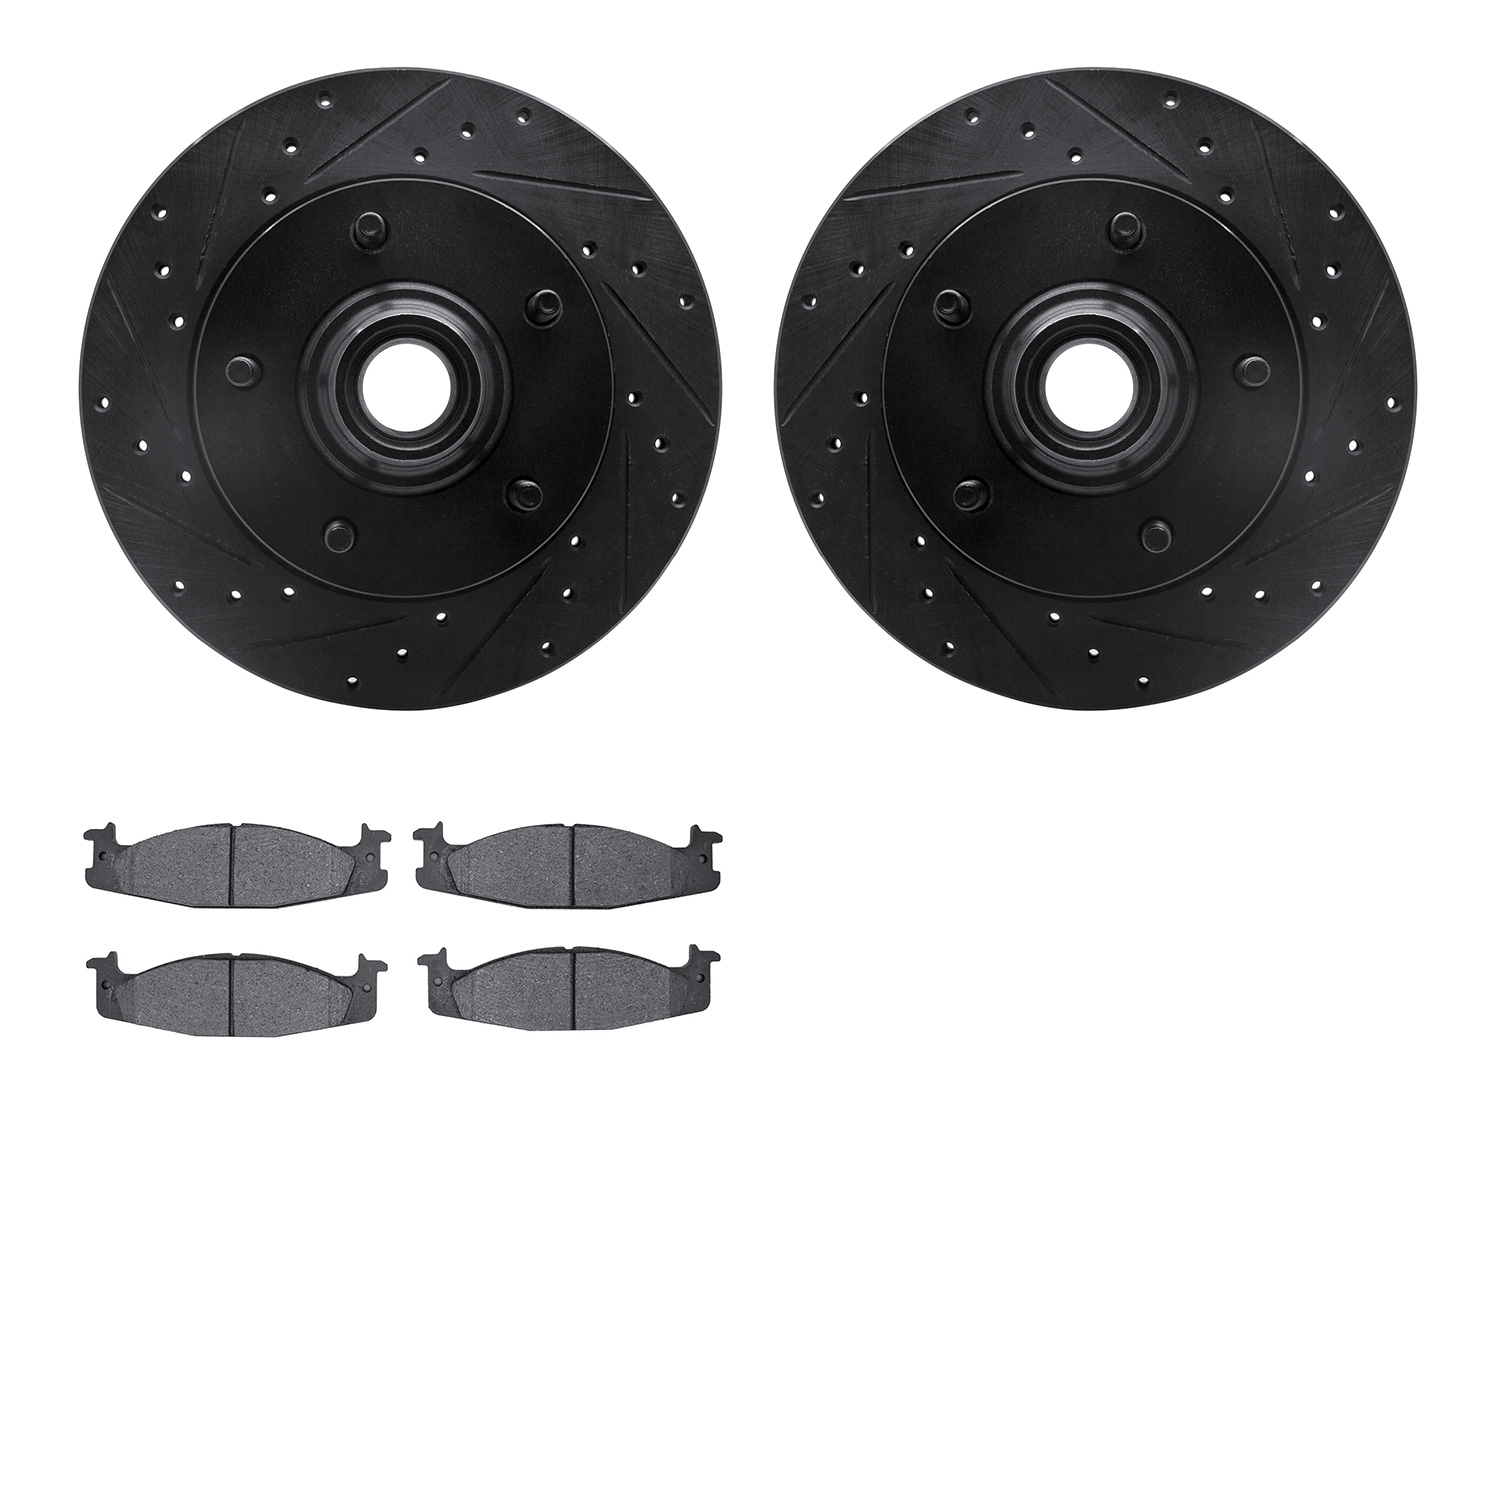 8402-54023 Drilled/Slotted Brake Rotors with Ultimate-Duty Brake Pads Kit [Black], 1994-2003 Ford/Lincoln/Mercury/Mazda, Positio